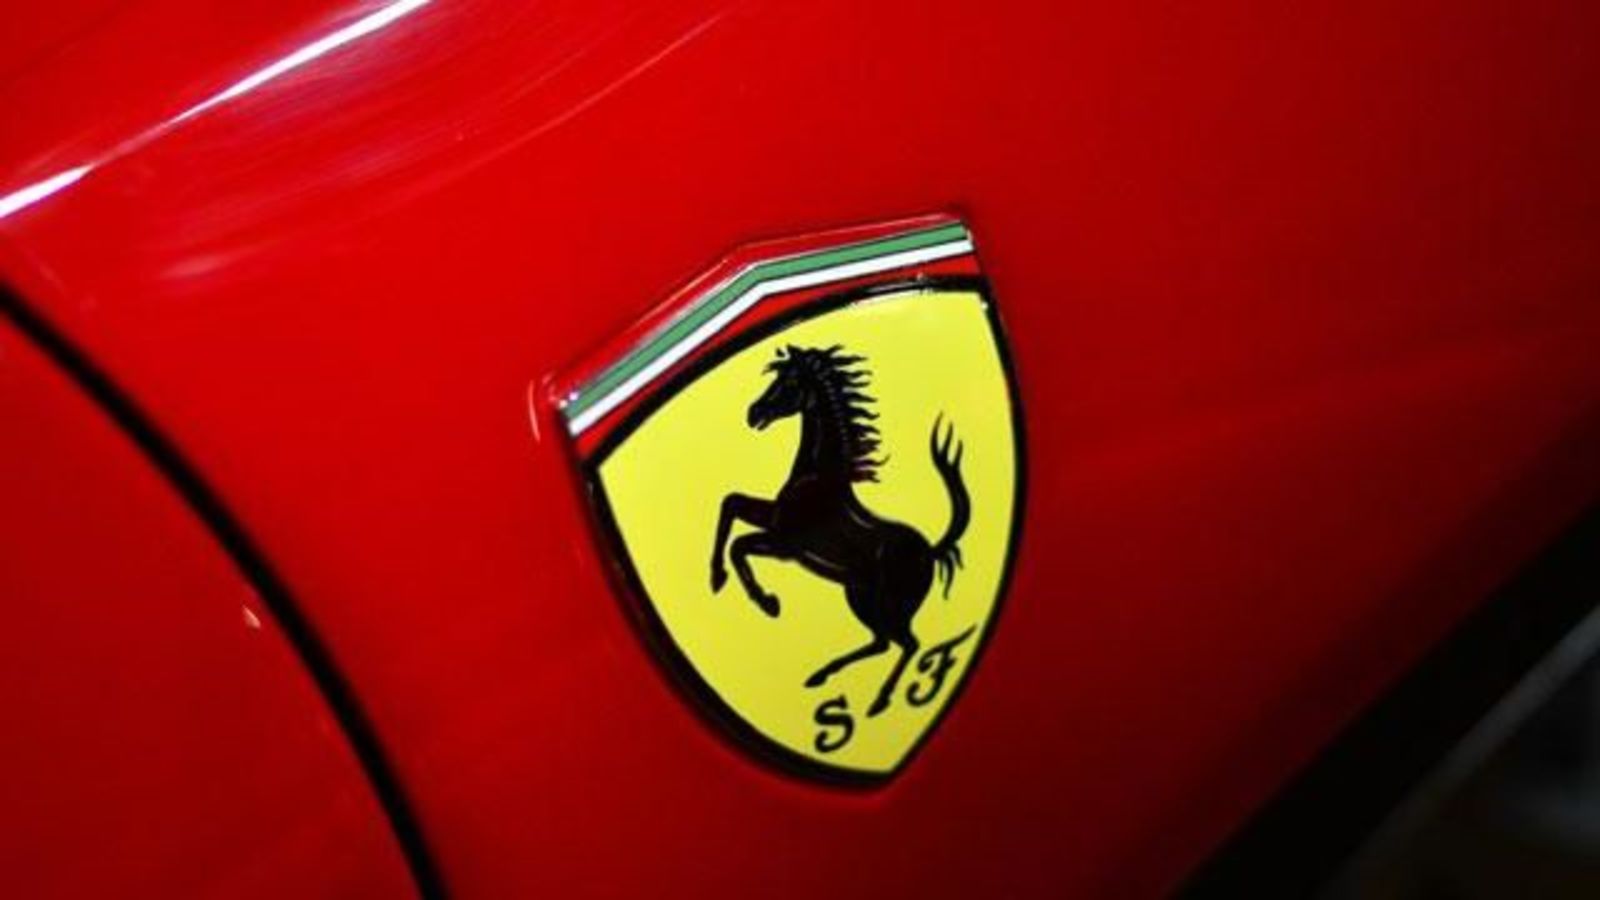 Ferrari patents innovative air conditioning system: Report | HT Auto